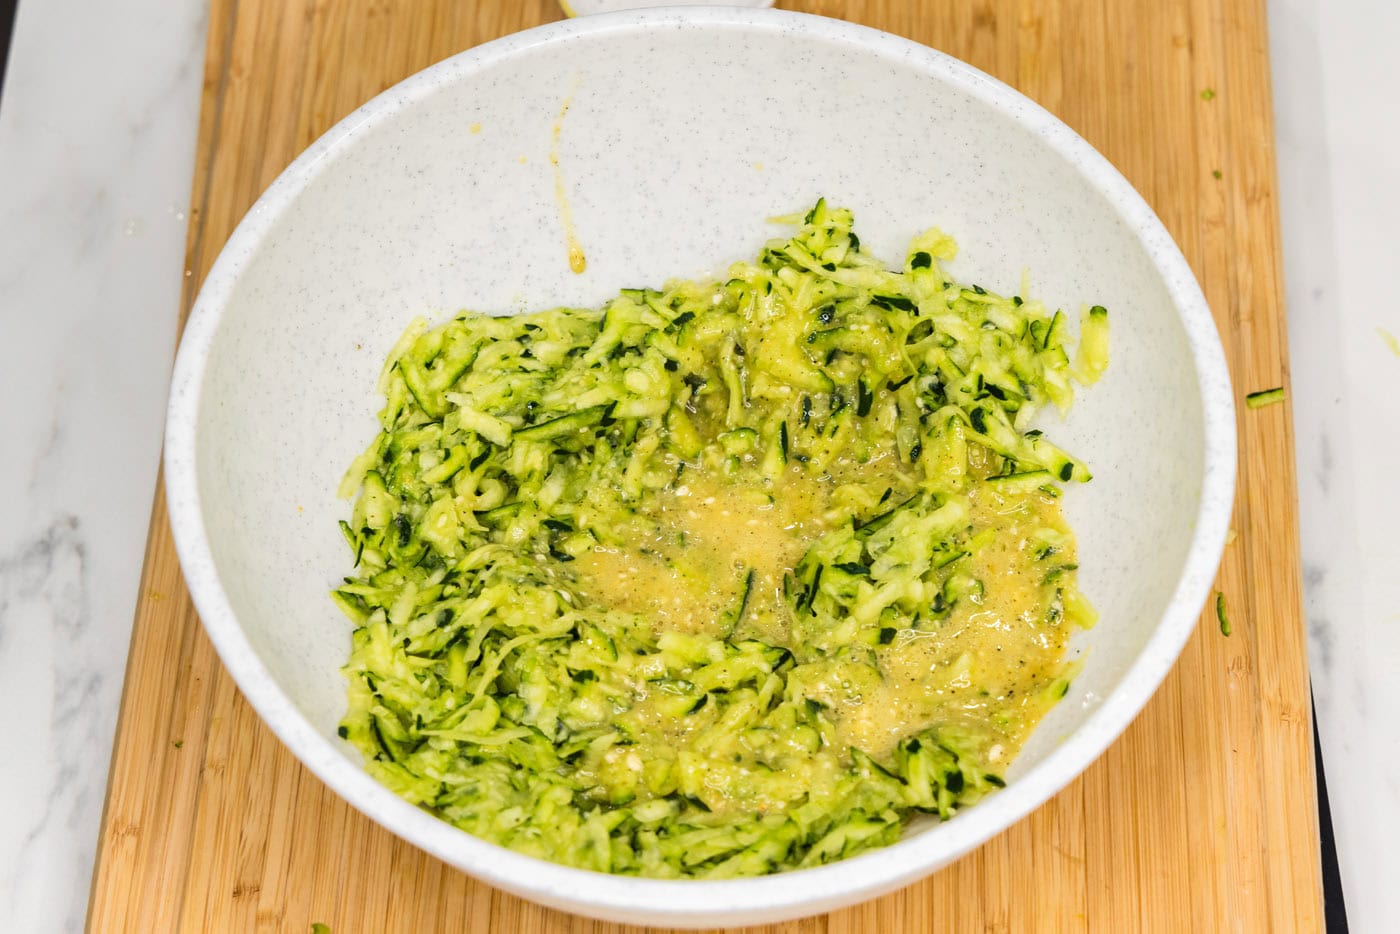 egg added to shredded zucchini in a bowl